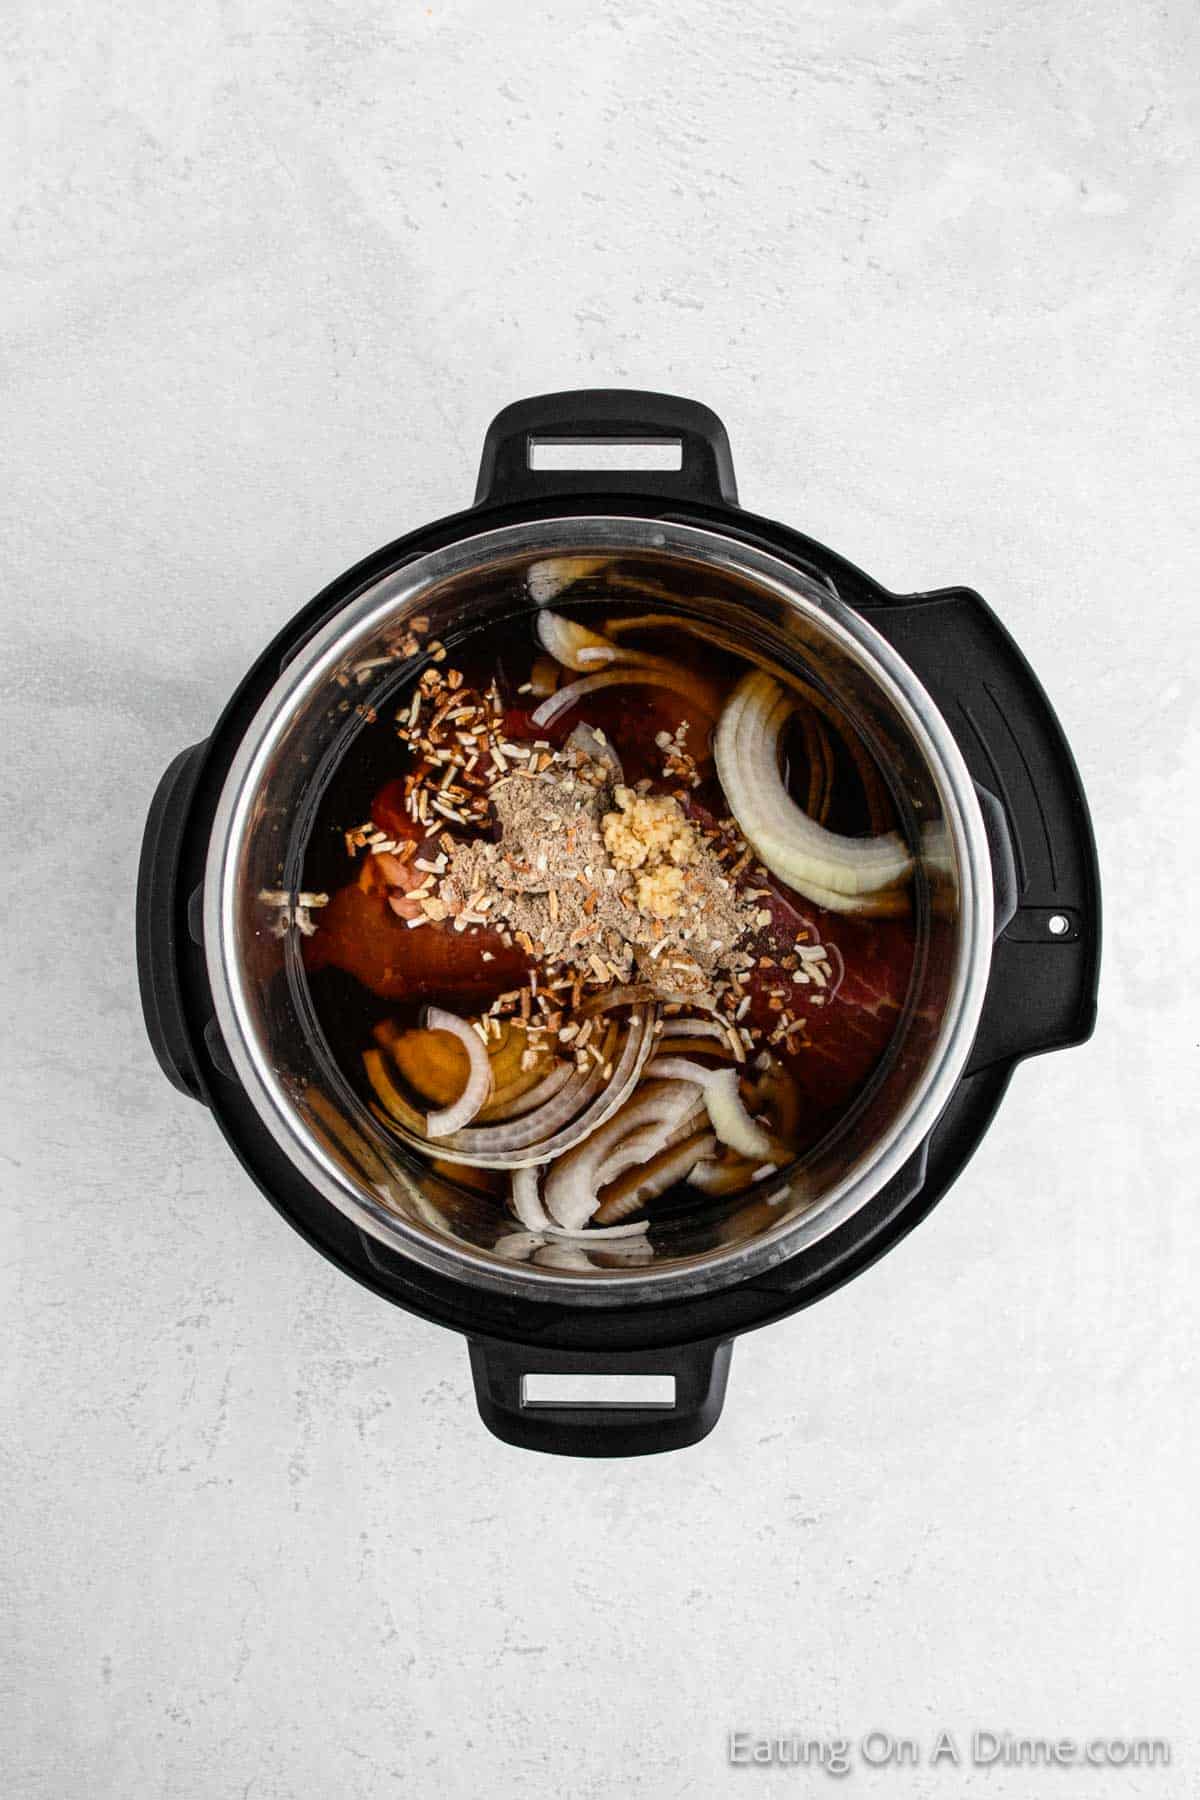 All the ingredient in the instant pot